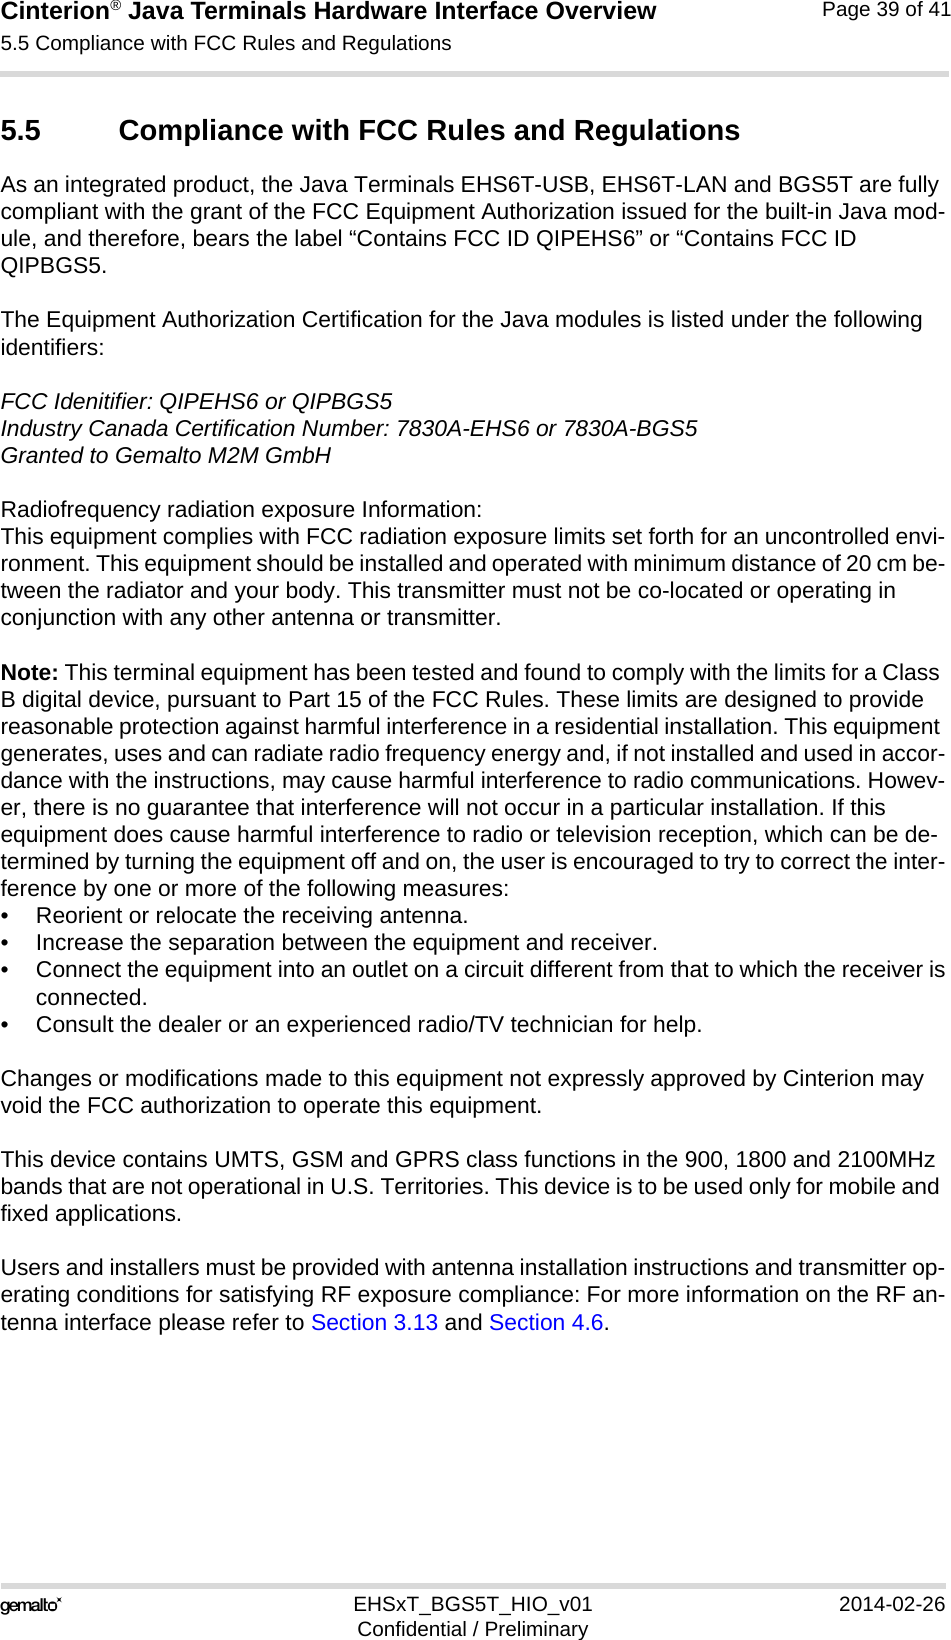 Cinterion® Java Terminals Hardware Interface Overview5.5 Compliance with FCC Rules and Regulations39EHSxT_BGS5T_HIO_v01 2014-02-26Confidential / PreliminaryPage 39 of 415.5 Compliance with FCC Rules and RegulationsAs an integrated product, the Java Terminals EHS6T-USB, EHS6T-LAN and BGS5T are fully compliant with the grant of the FCC Equipment Authorization issued for the built-in Java mod-ule, and therefore, bears the label “Contains FCC ID QIPEHS6” or “Contains FCC ID QIPBGS5.The Equipment Authorization Certification for the Java modules is listed under the following identifiers:FCC Idenitifier: QIPEHS6 or QIPBGS5Industry Canada Certification Number: 7830A-EHS6 or 7830A-BGS5Granted to Gemalto M2M GmbHRadiofrequency radiation exposure Information:This equipment complies with FCC radiation exposure limits set forth for an uncontrolled envi-ronment. This equipment should be installed and operated with minimum distance of 20 cm be-tween the radiator and your body. This transmitter must not be co-located or operating in conjunction with any other antenna or transmitter.Note: This terminal equipment has been tested and found to comply with the limits for a Class B digital device, pursuant to Part 15 of the FCC Rules. These limits are designed to provide reasonable protection against harmful interference in a residential installation. This equipment generates, uses and can radiate radio frequency energy and, if not installed and used in accor-dance with the instructions, may cause harmful interference to radio communications. Howev-er, there is no guarantee that interference will not occur in a particular installation. If this equipment does cause harmful interference to radio or television reception, which can be de-termined by turning the equipment off and on, the user is encouraged to try to correct the inter-ference by one or more of the following measures:• Reorient or relocate the receiving antenna.• Increase the separation between the equipment and receiver.• Connect the equipment into an outlet on a circuit different from that to which the receiver isconnected.• Consult the dealer or an experienced radio/TV technician for help.Changes or modifications made to this equipment not expressly approved by Cinterion may void the FCC authorization to operate this equipment. This device contains UMTS, GSM and GPRS class functions in the 900, 1800 and 2100MHz bands that are not operational in U.S. Territories. This device is to be used only for mobile and fixed applications.Users and installers must be provided with antenna installation instructions and transmitter op-erating conditions for satisfying RF exposure compliance: For more information on the RF an-tenna interface please refer to Section 3.13 and Section 4.6.